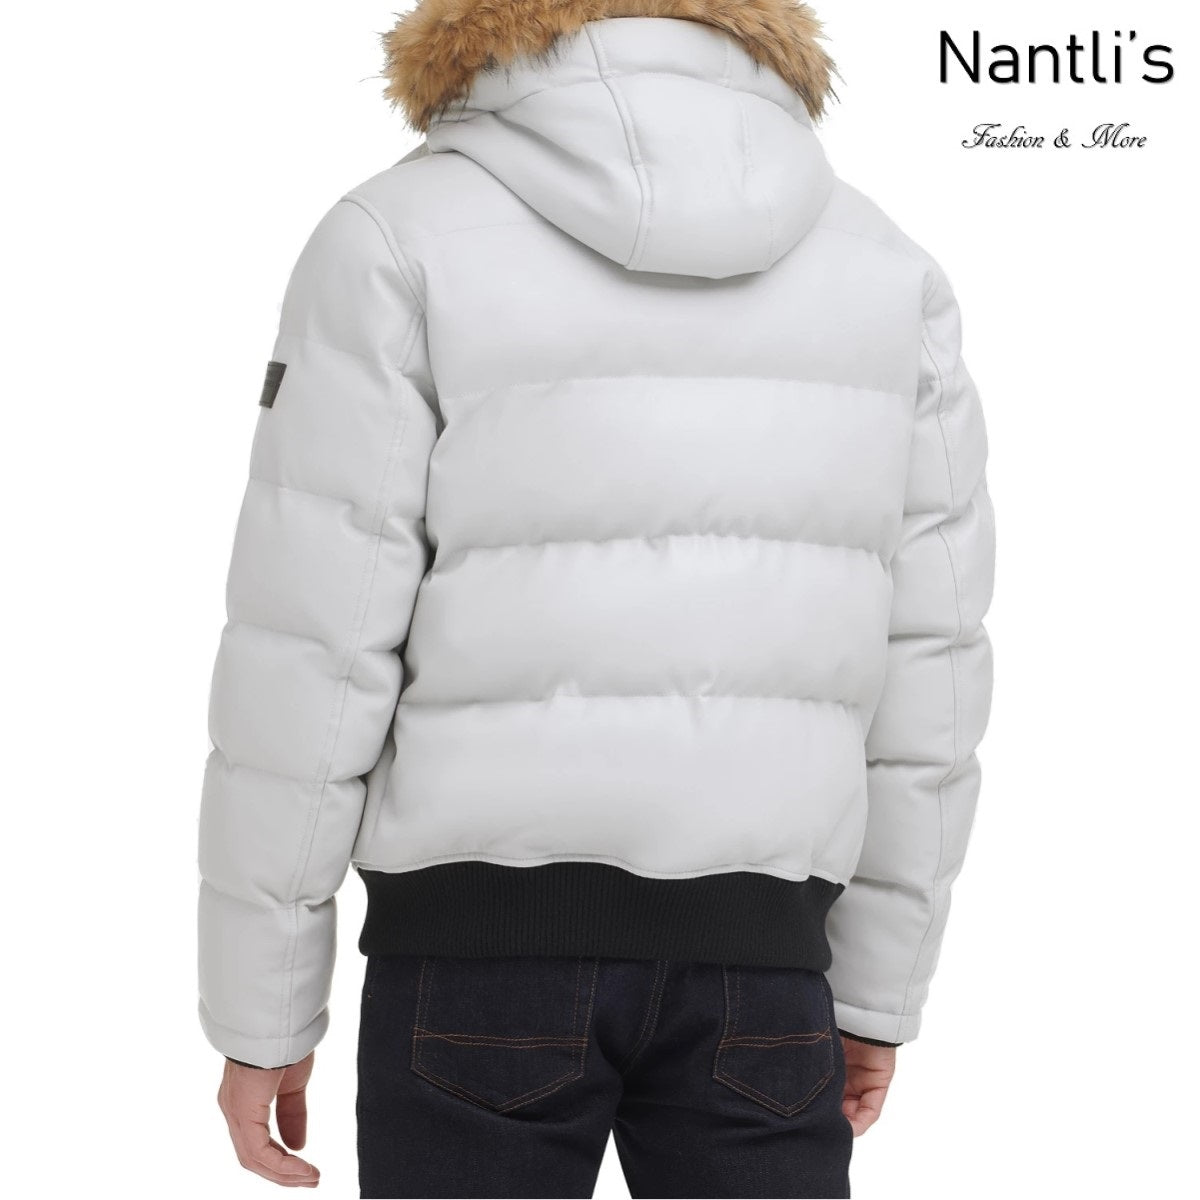 Chamarra para Hombre - TM-150AU263 Jacket for Men – Nantli's - Online Store  | Footwear, Clothing and Accessories